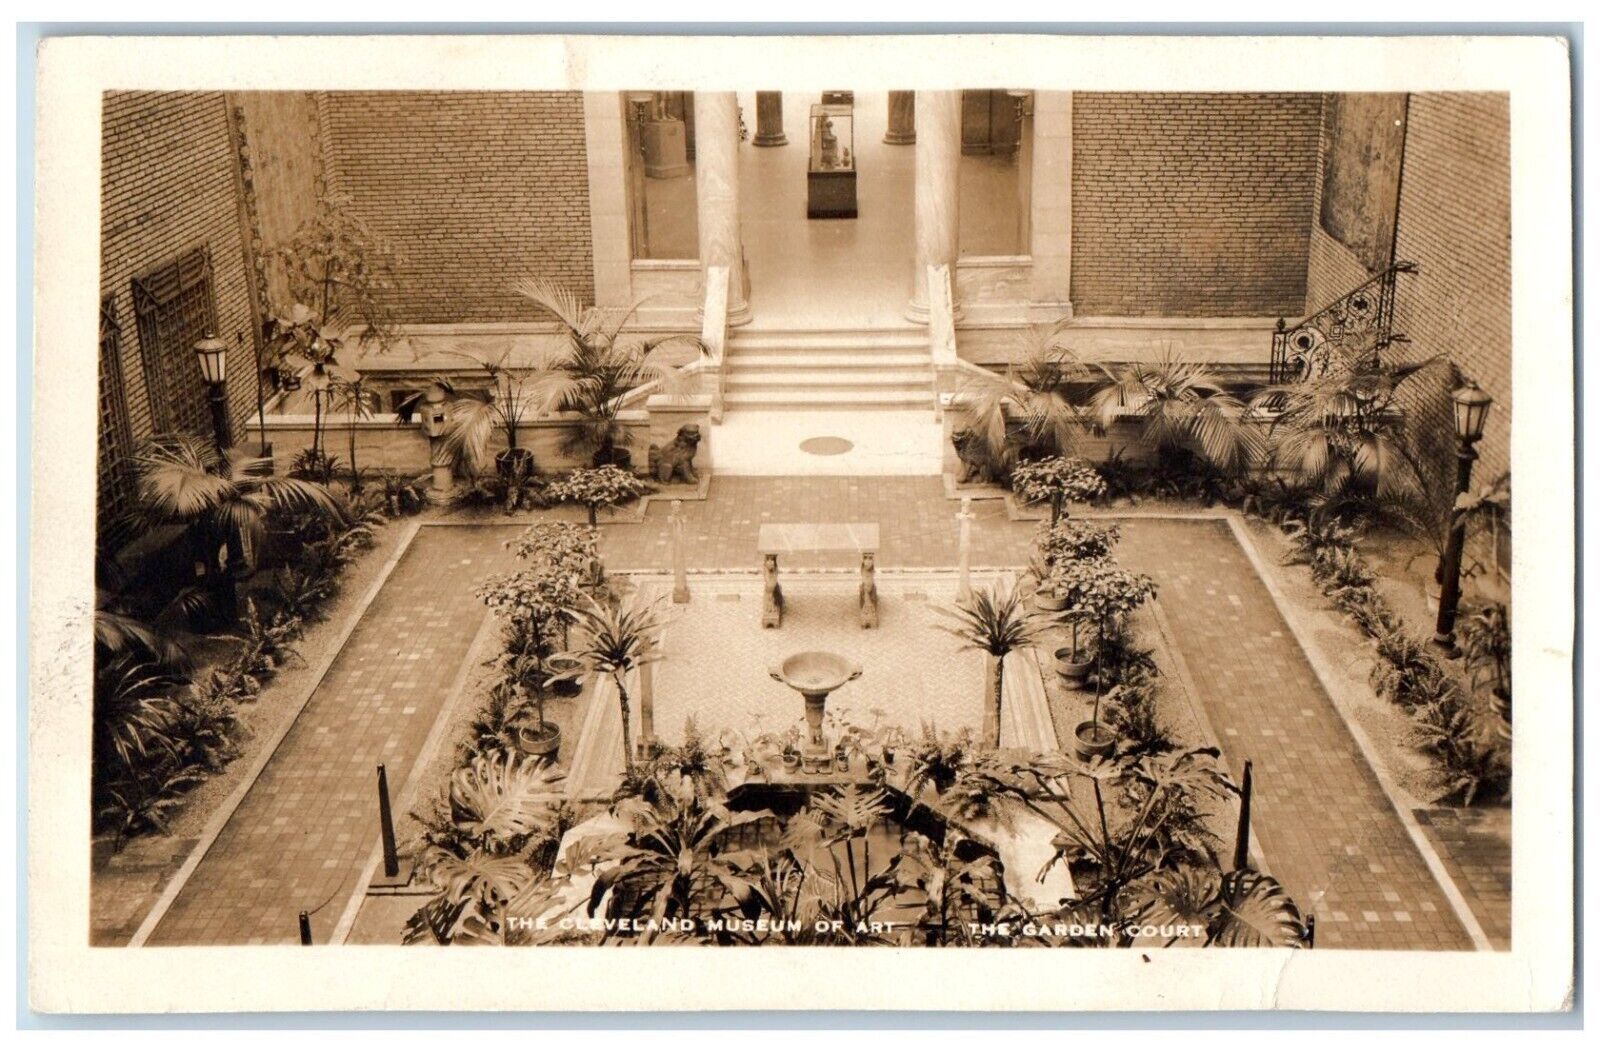 Cleveland Ohio Postcard RPPC Photo The Cleveland Museum Of Art The Garden Court